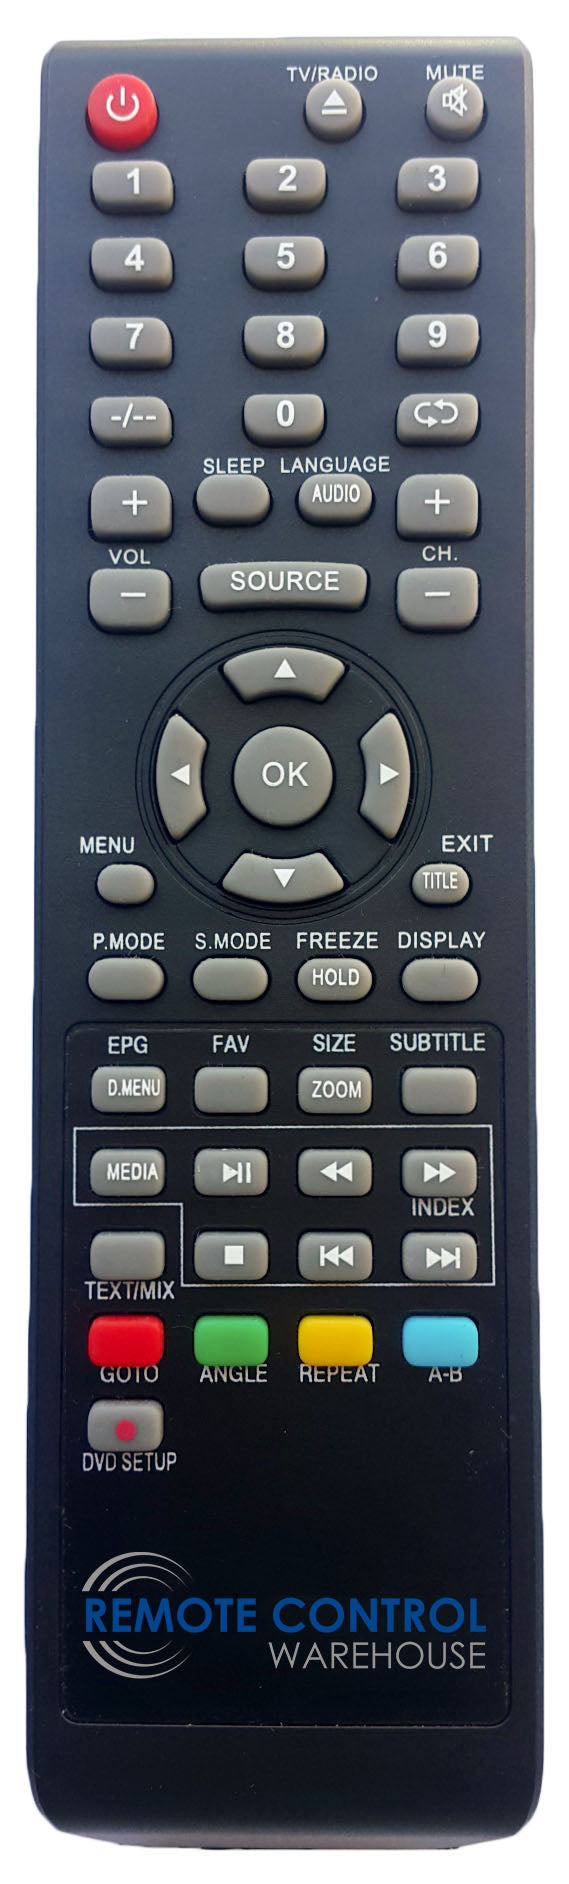 REPLACEMENT VIVID REMOTE CONTROL - AT-32HD1 AT32HD1 LCD TV - Remote Control Warehouse